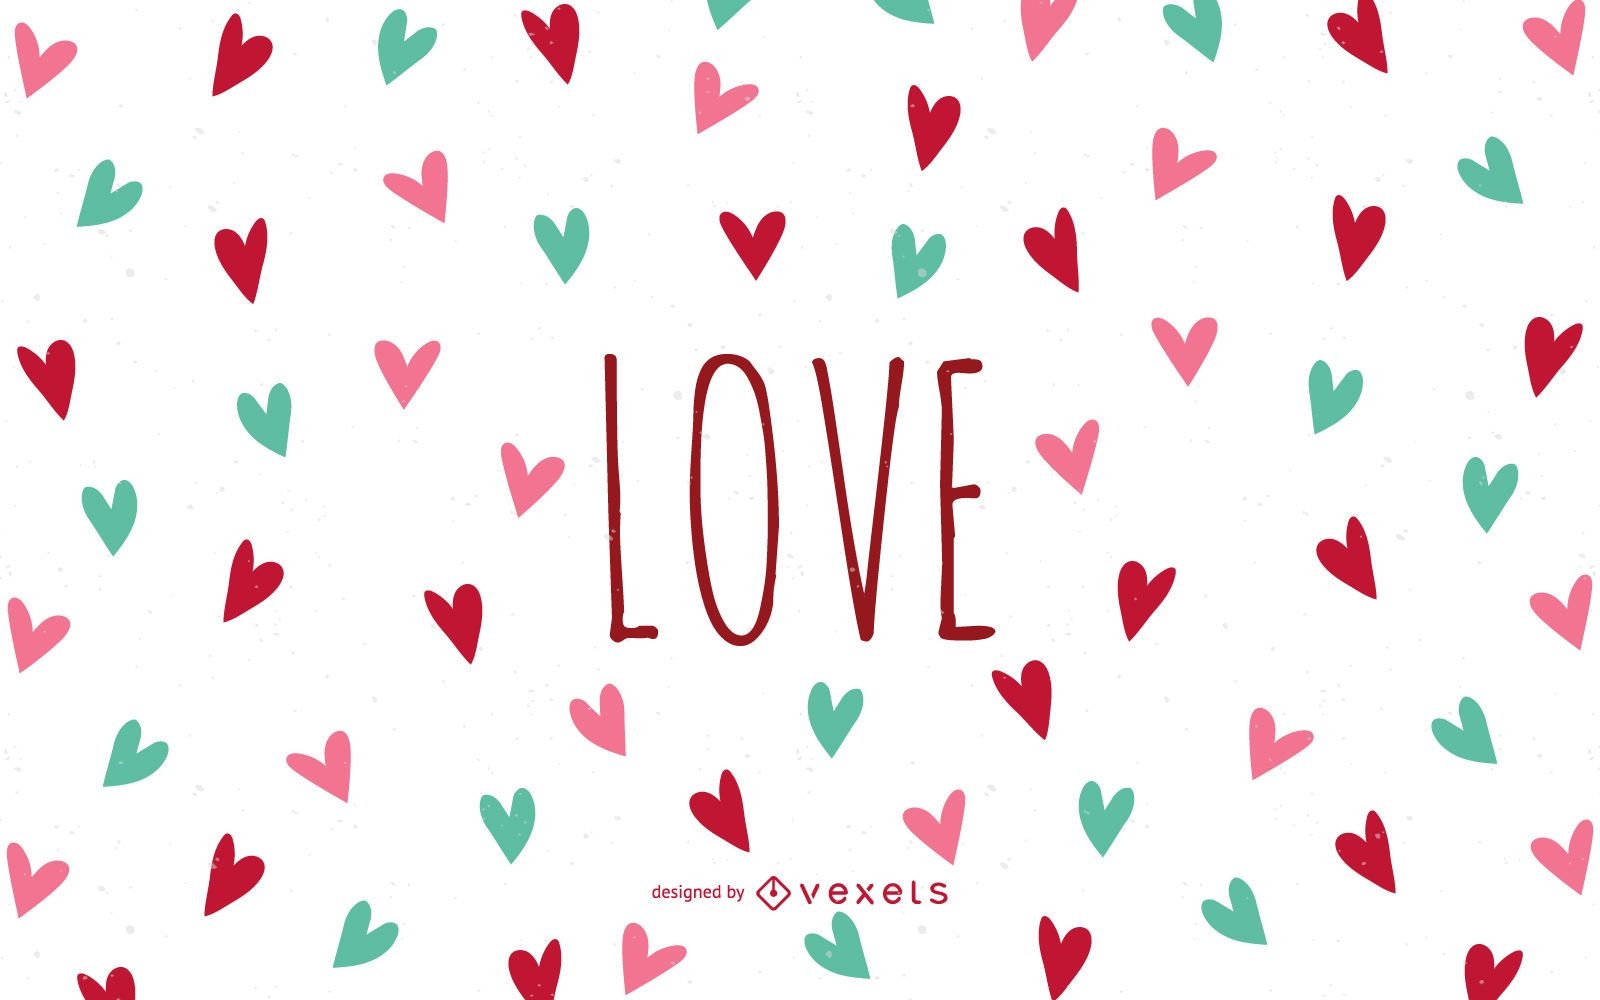 Love wallpaper with hearts